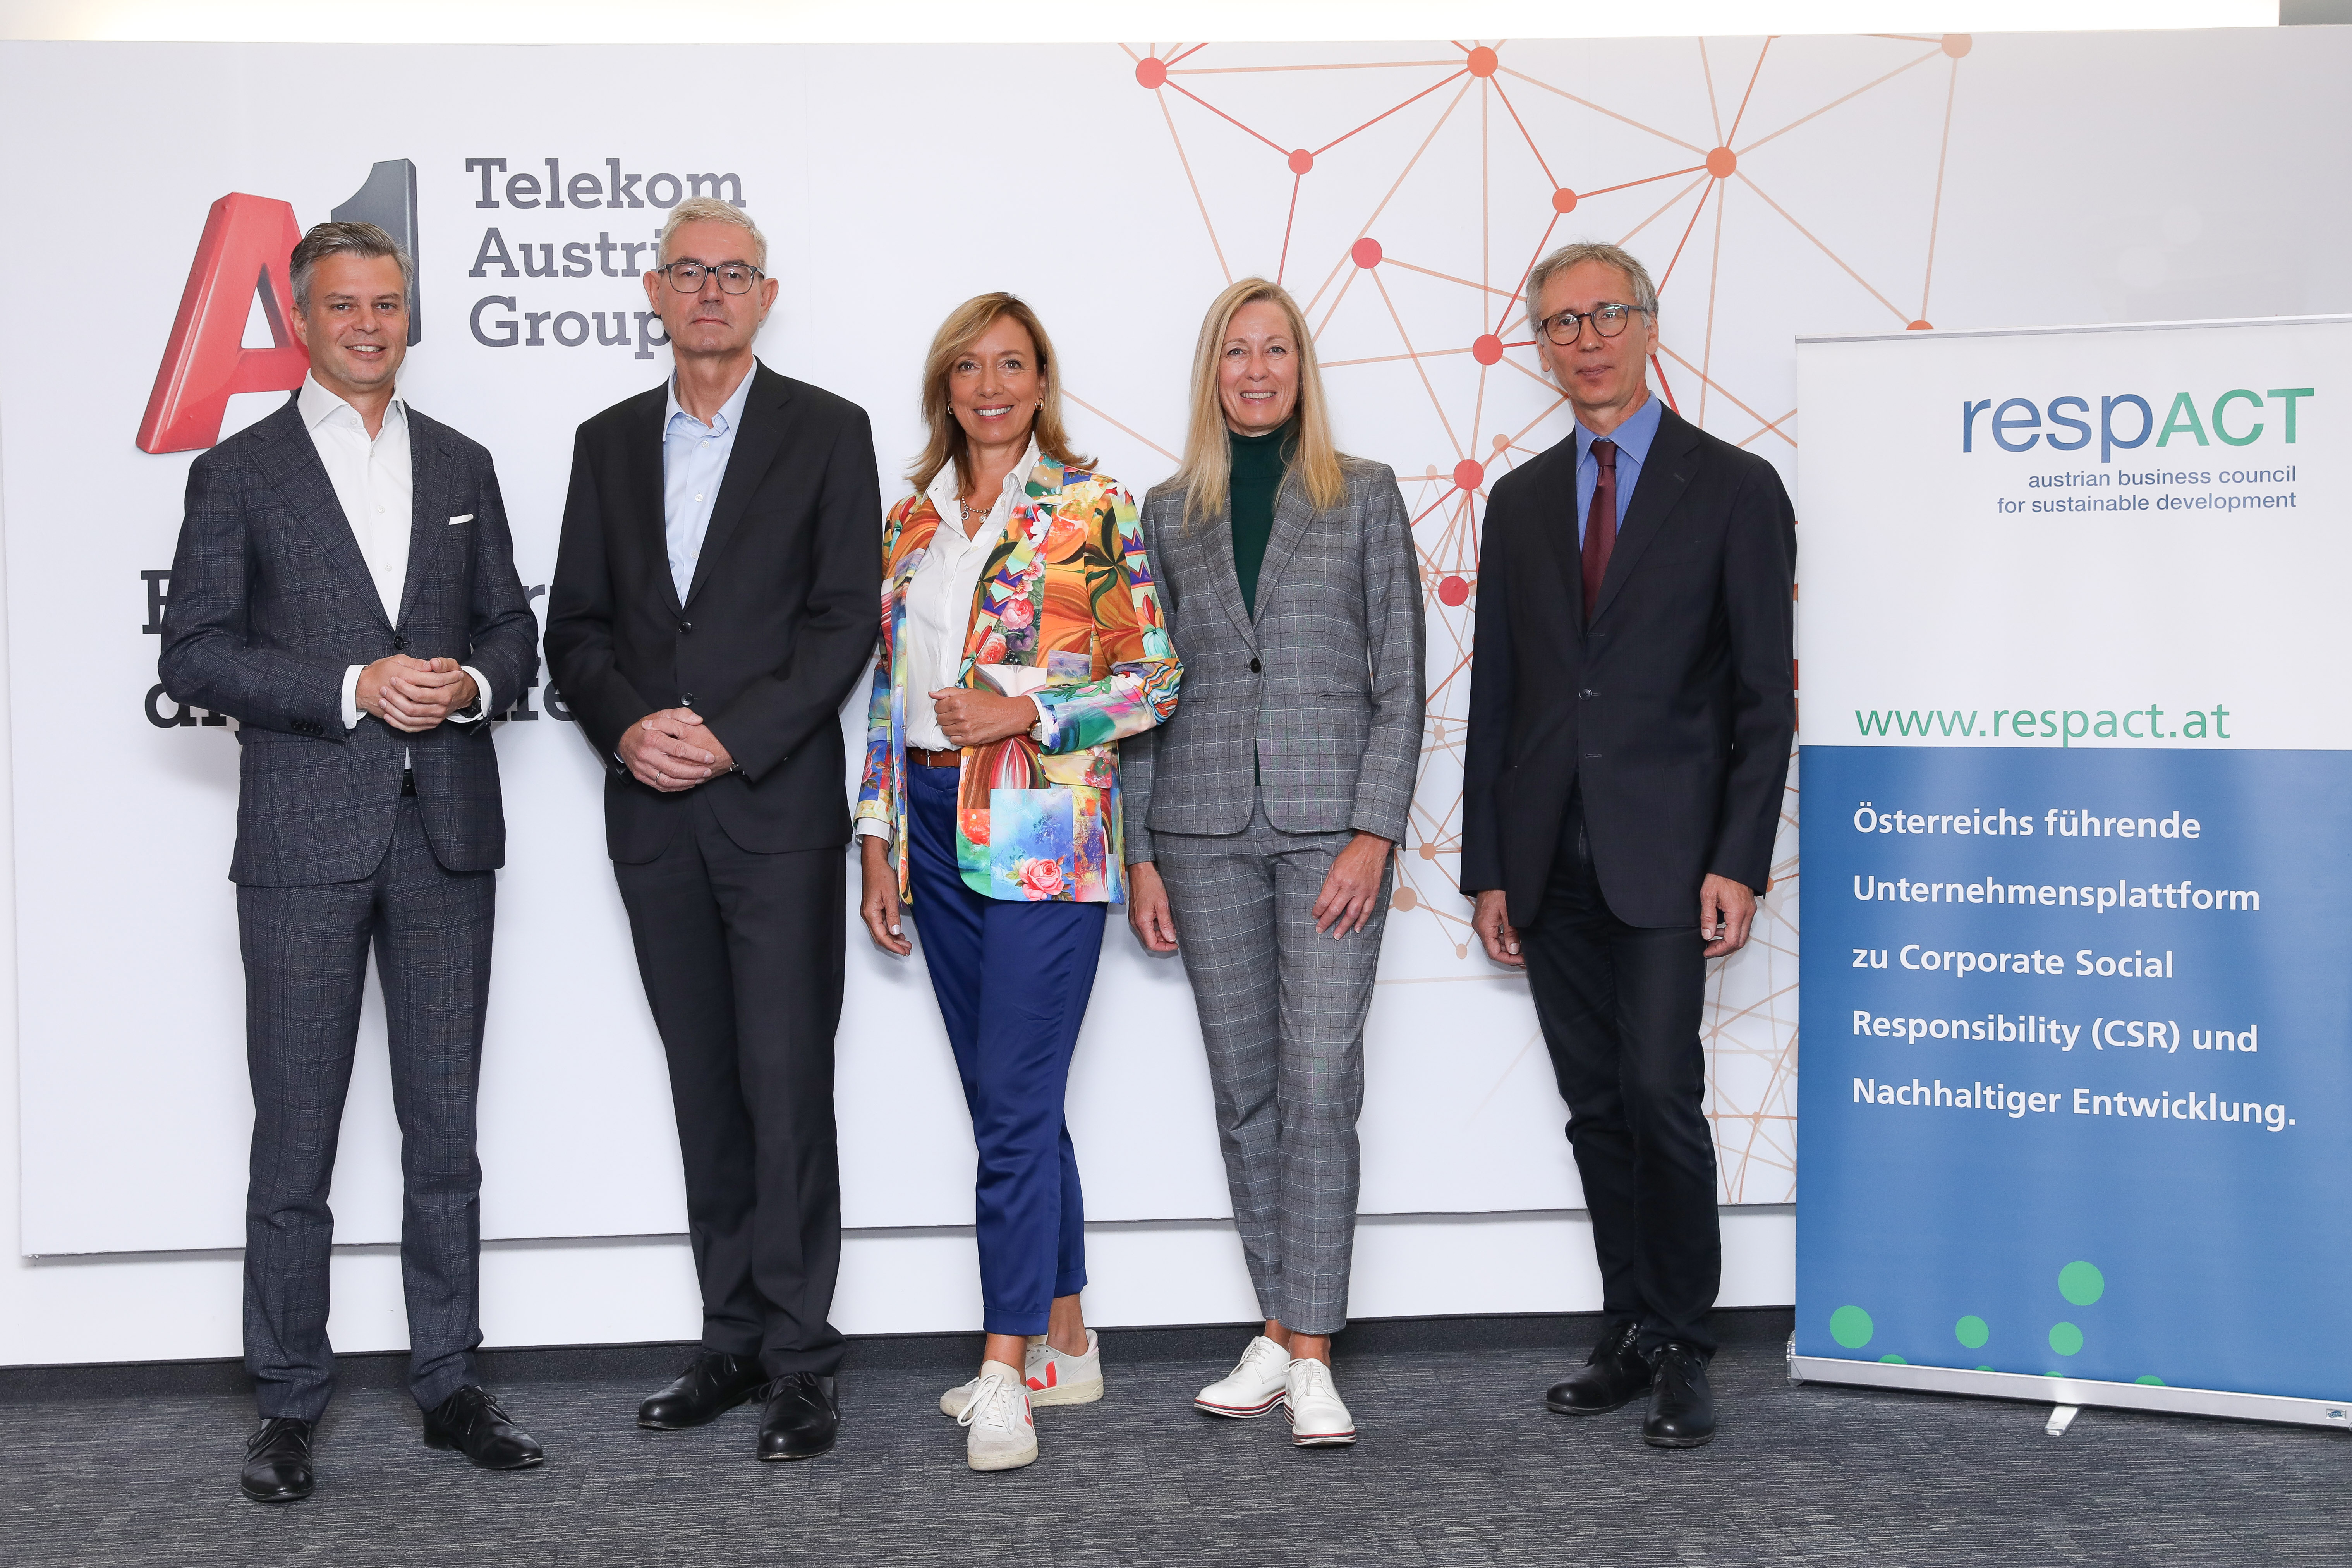 v. l. n. r.: Thomas Arnoldner (CEO A1 Group), Peter Giffinger (CEO Saint Gobain), Ladeja Godina Košir (Founder and Executive Director of Circular Change), Karin Huber-Heim (Executive Director des Circular Economy Forum Austria) und Andreas Tschulik  